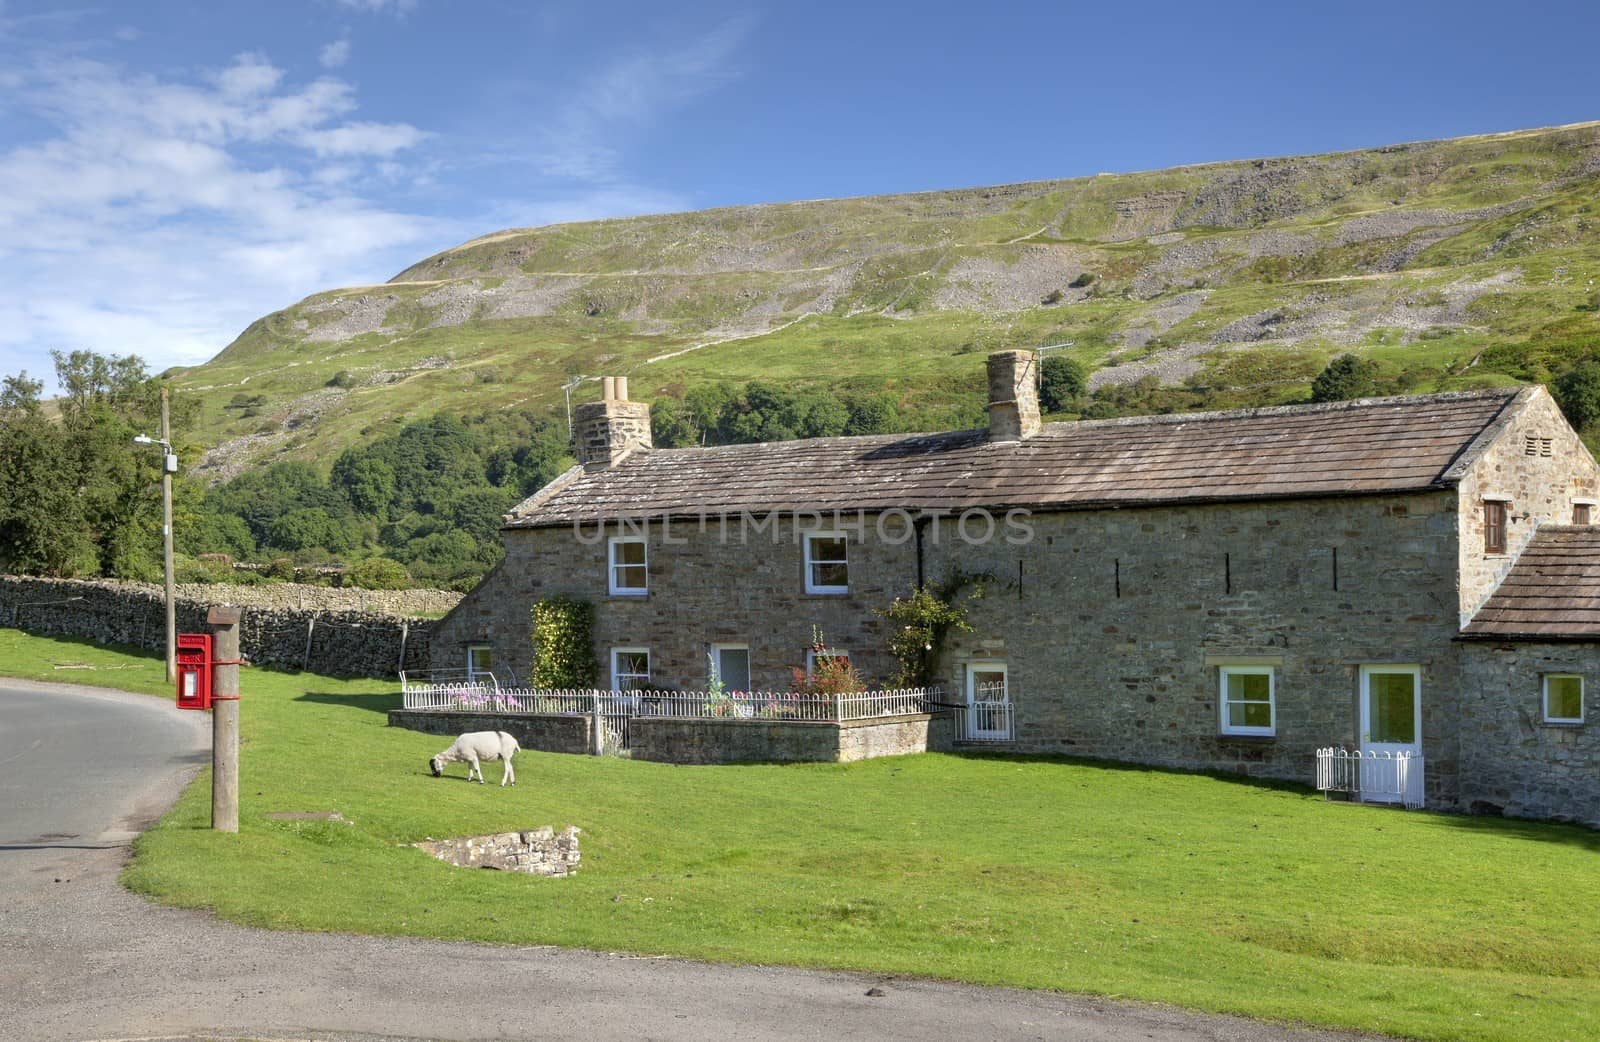 Stone cottage near Reeth, Yorkshire Dales National Park, England.